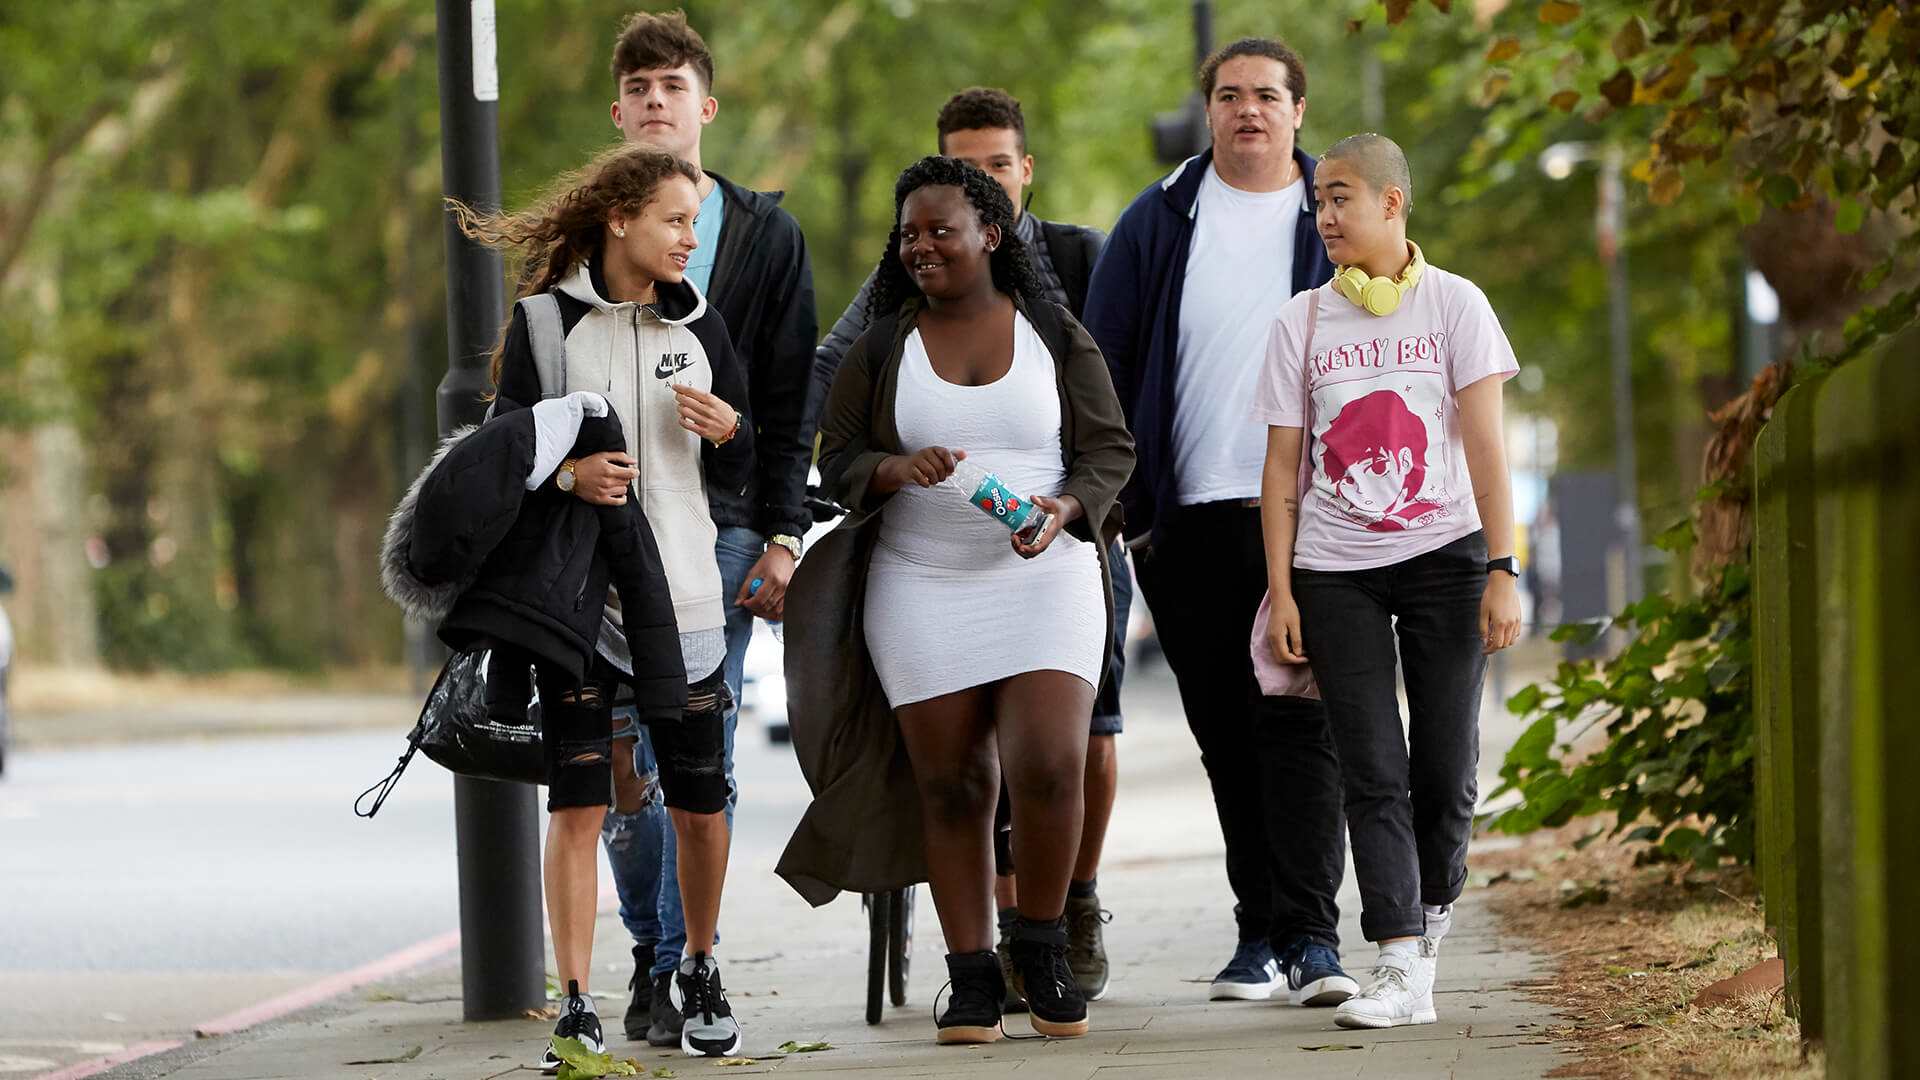 Six young people chatting as they walk through a park together.